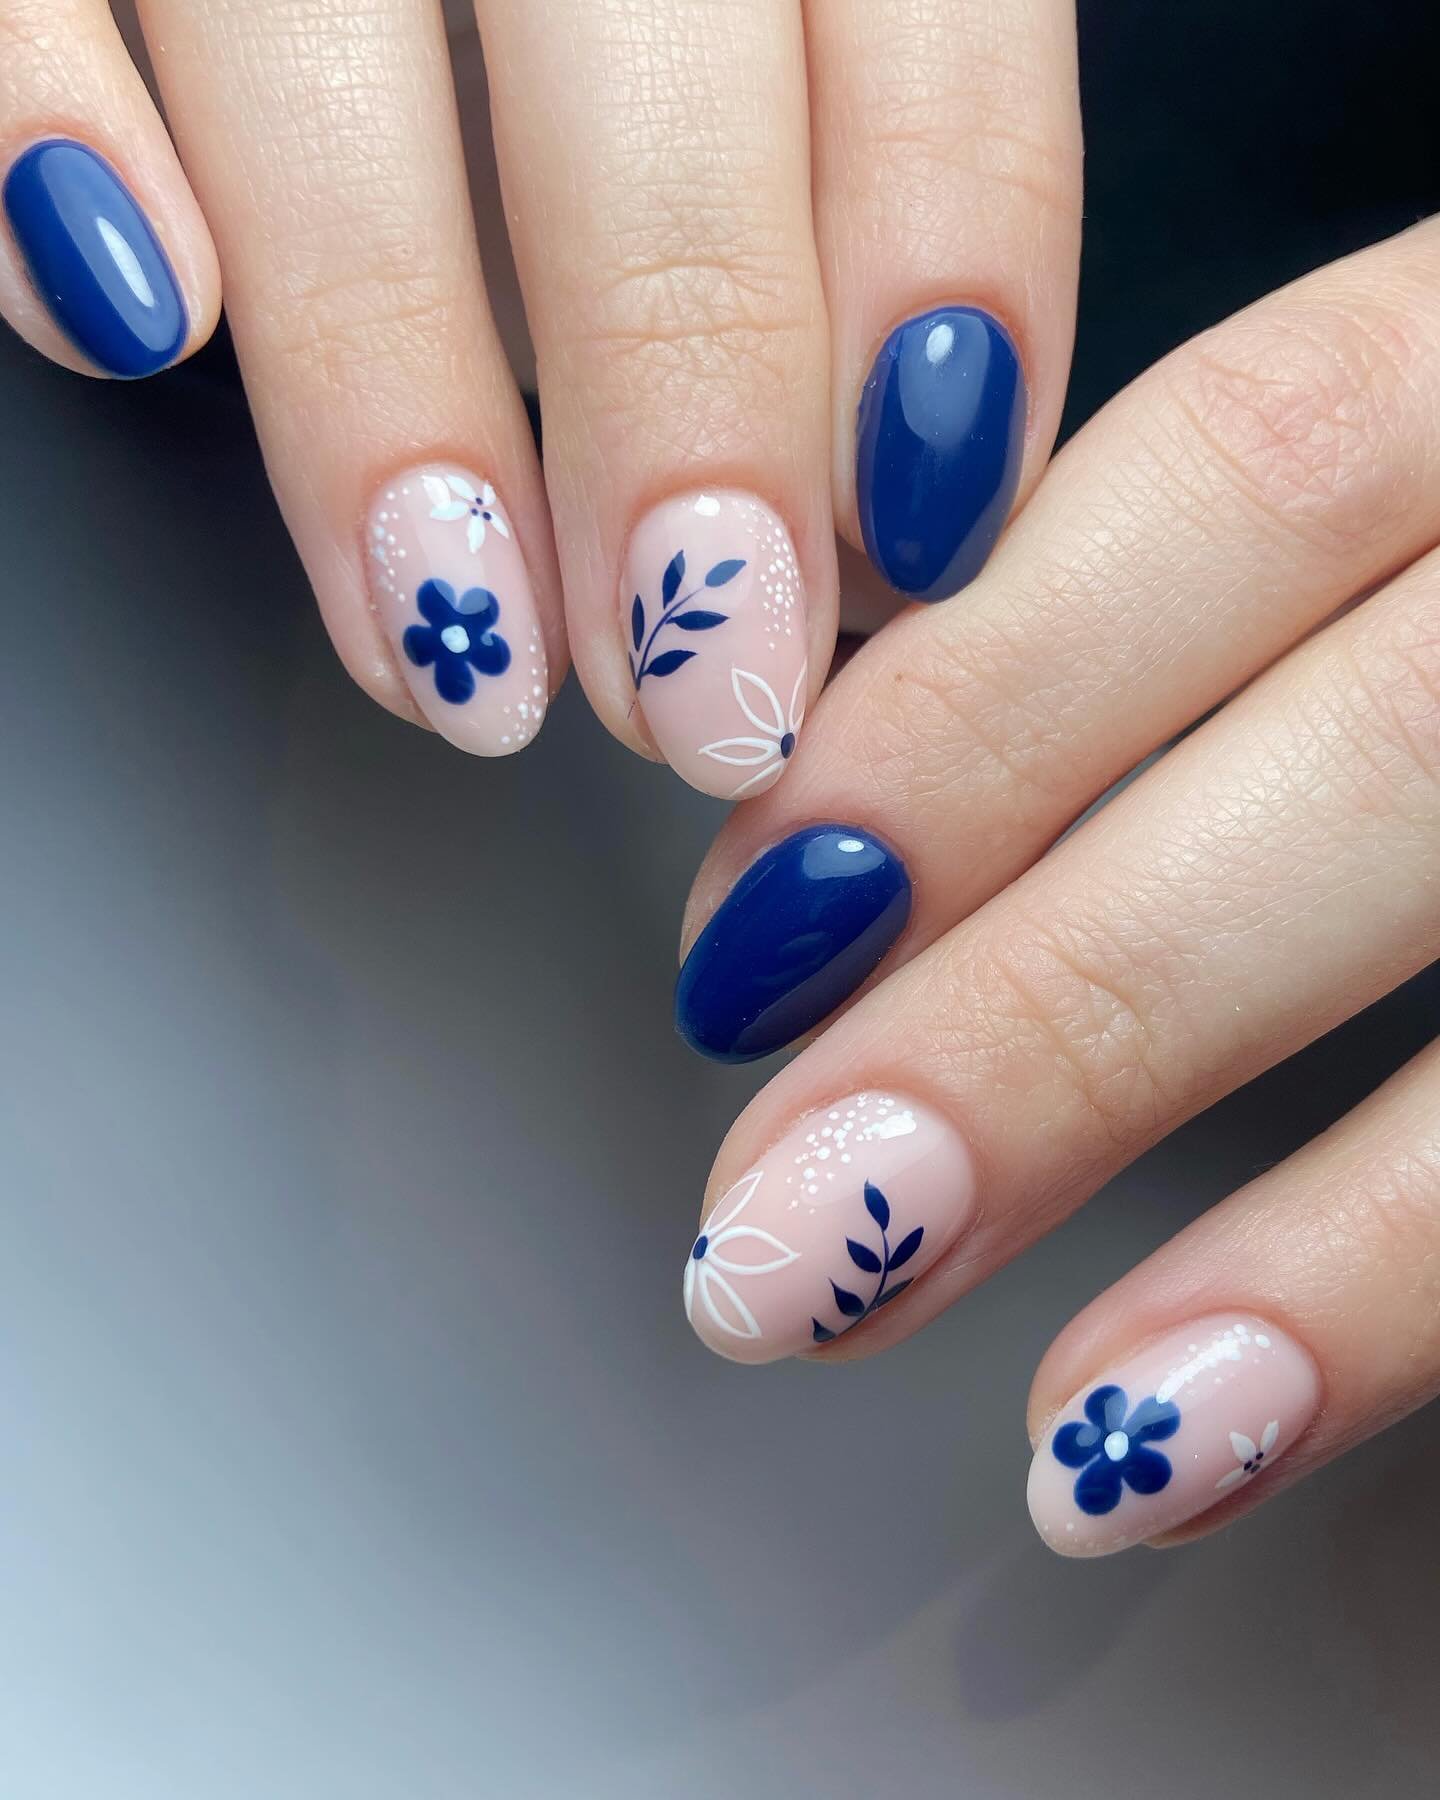 19 - Picture of Blue Nails